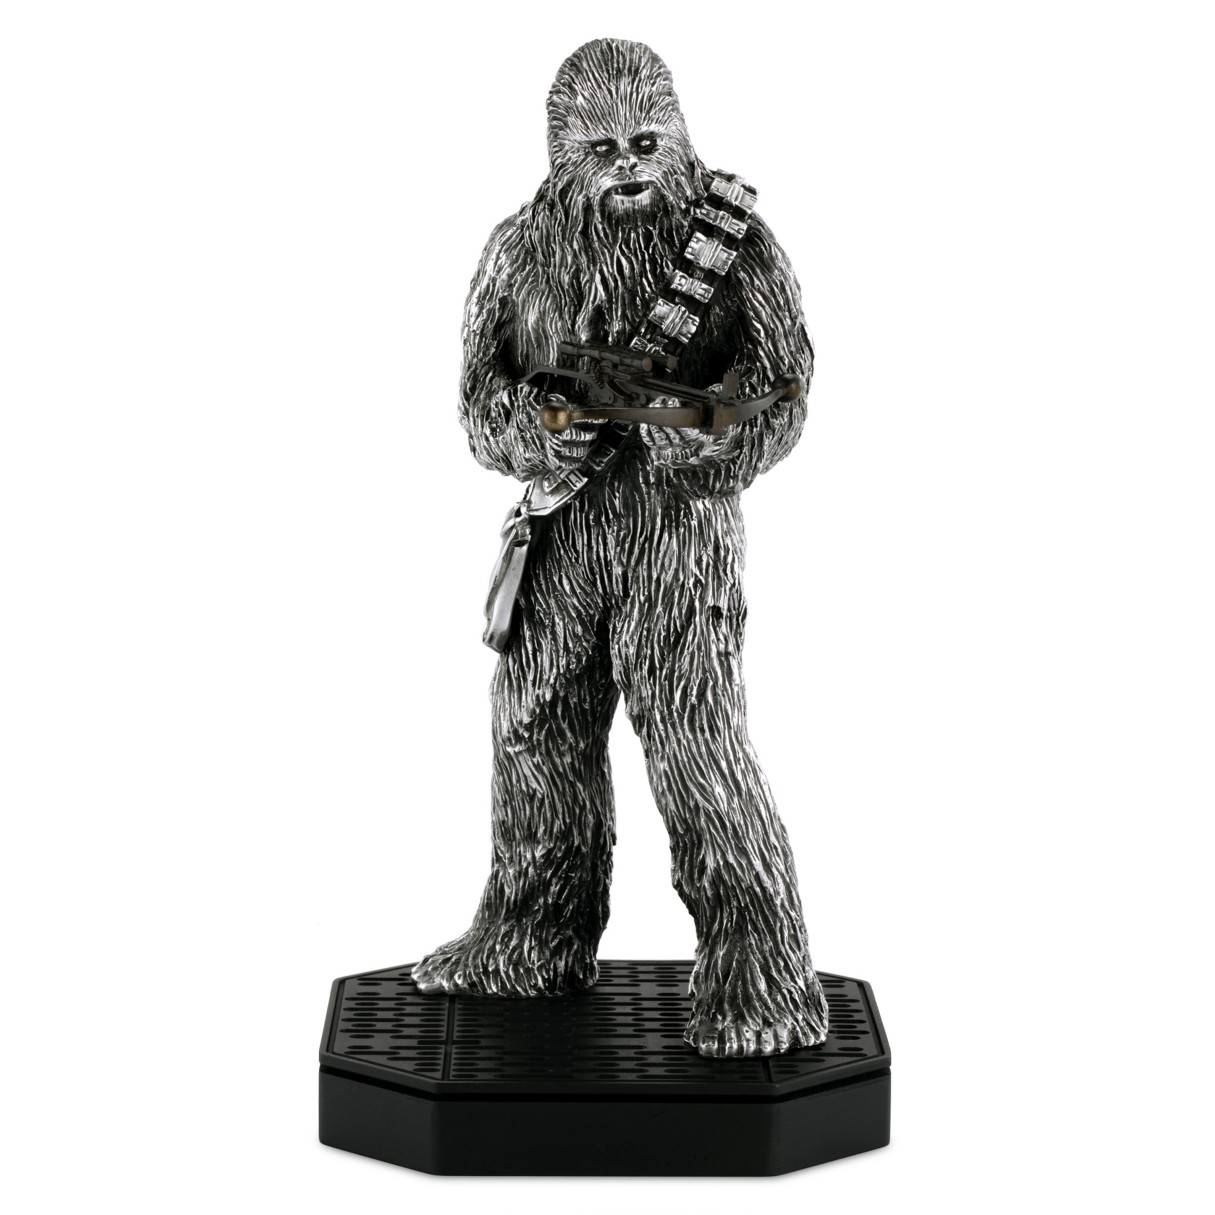 Chewbacca Pewter Figurine by Royal Selangor – Star Wars – Limited Edition